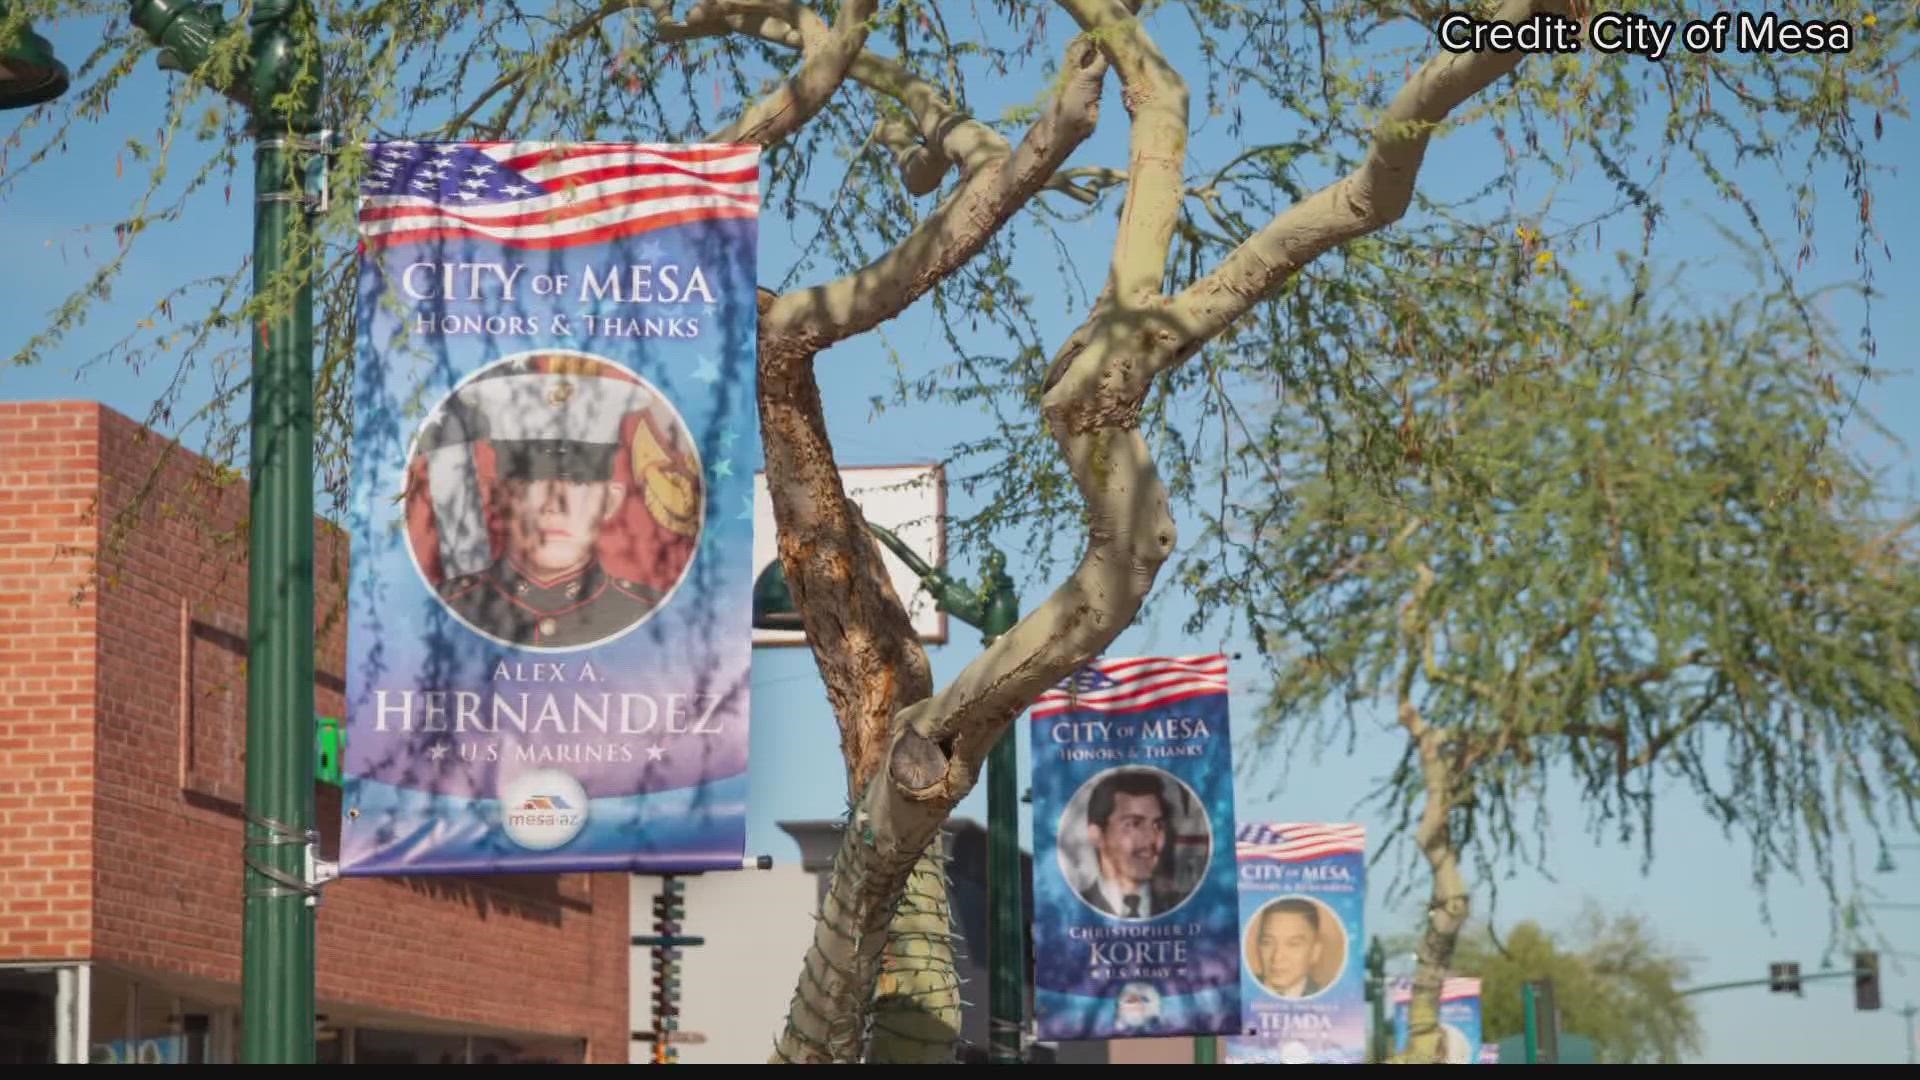 Mesa is honoring those who serve ahead of the Memorial Day weekend. The city is lined with banners paying homage to veterans and active-duty military members.